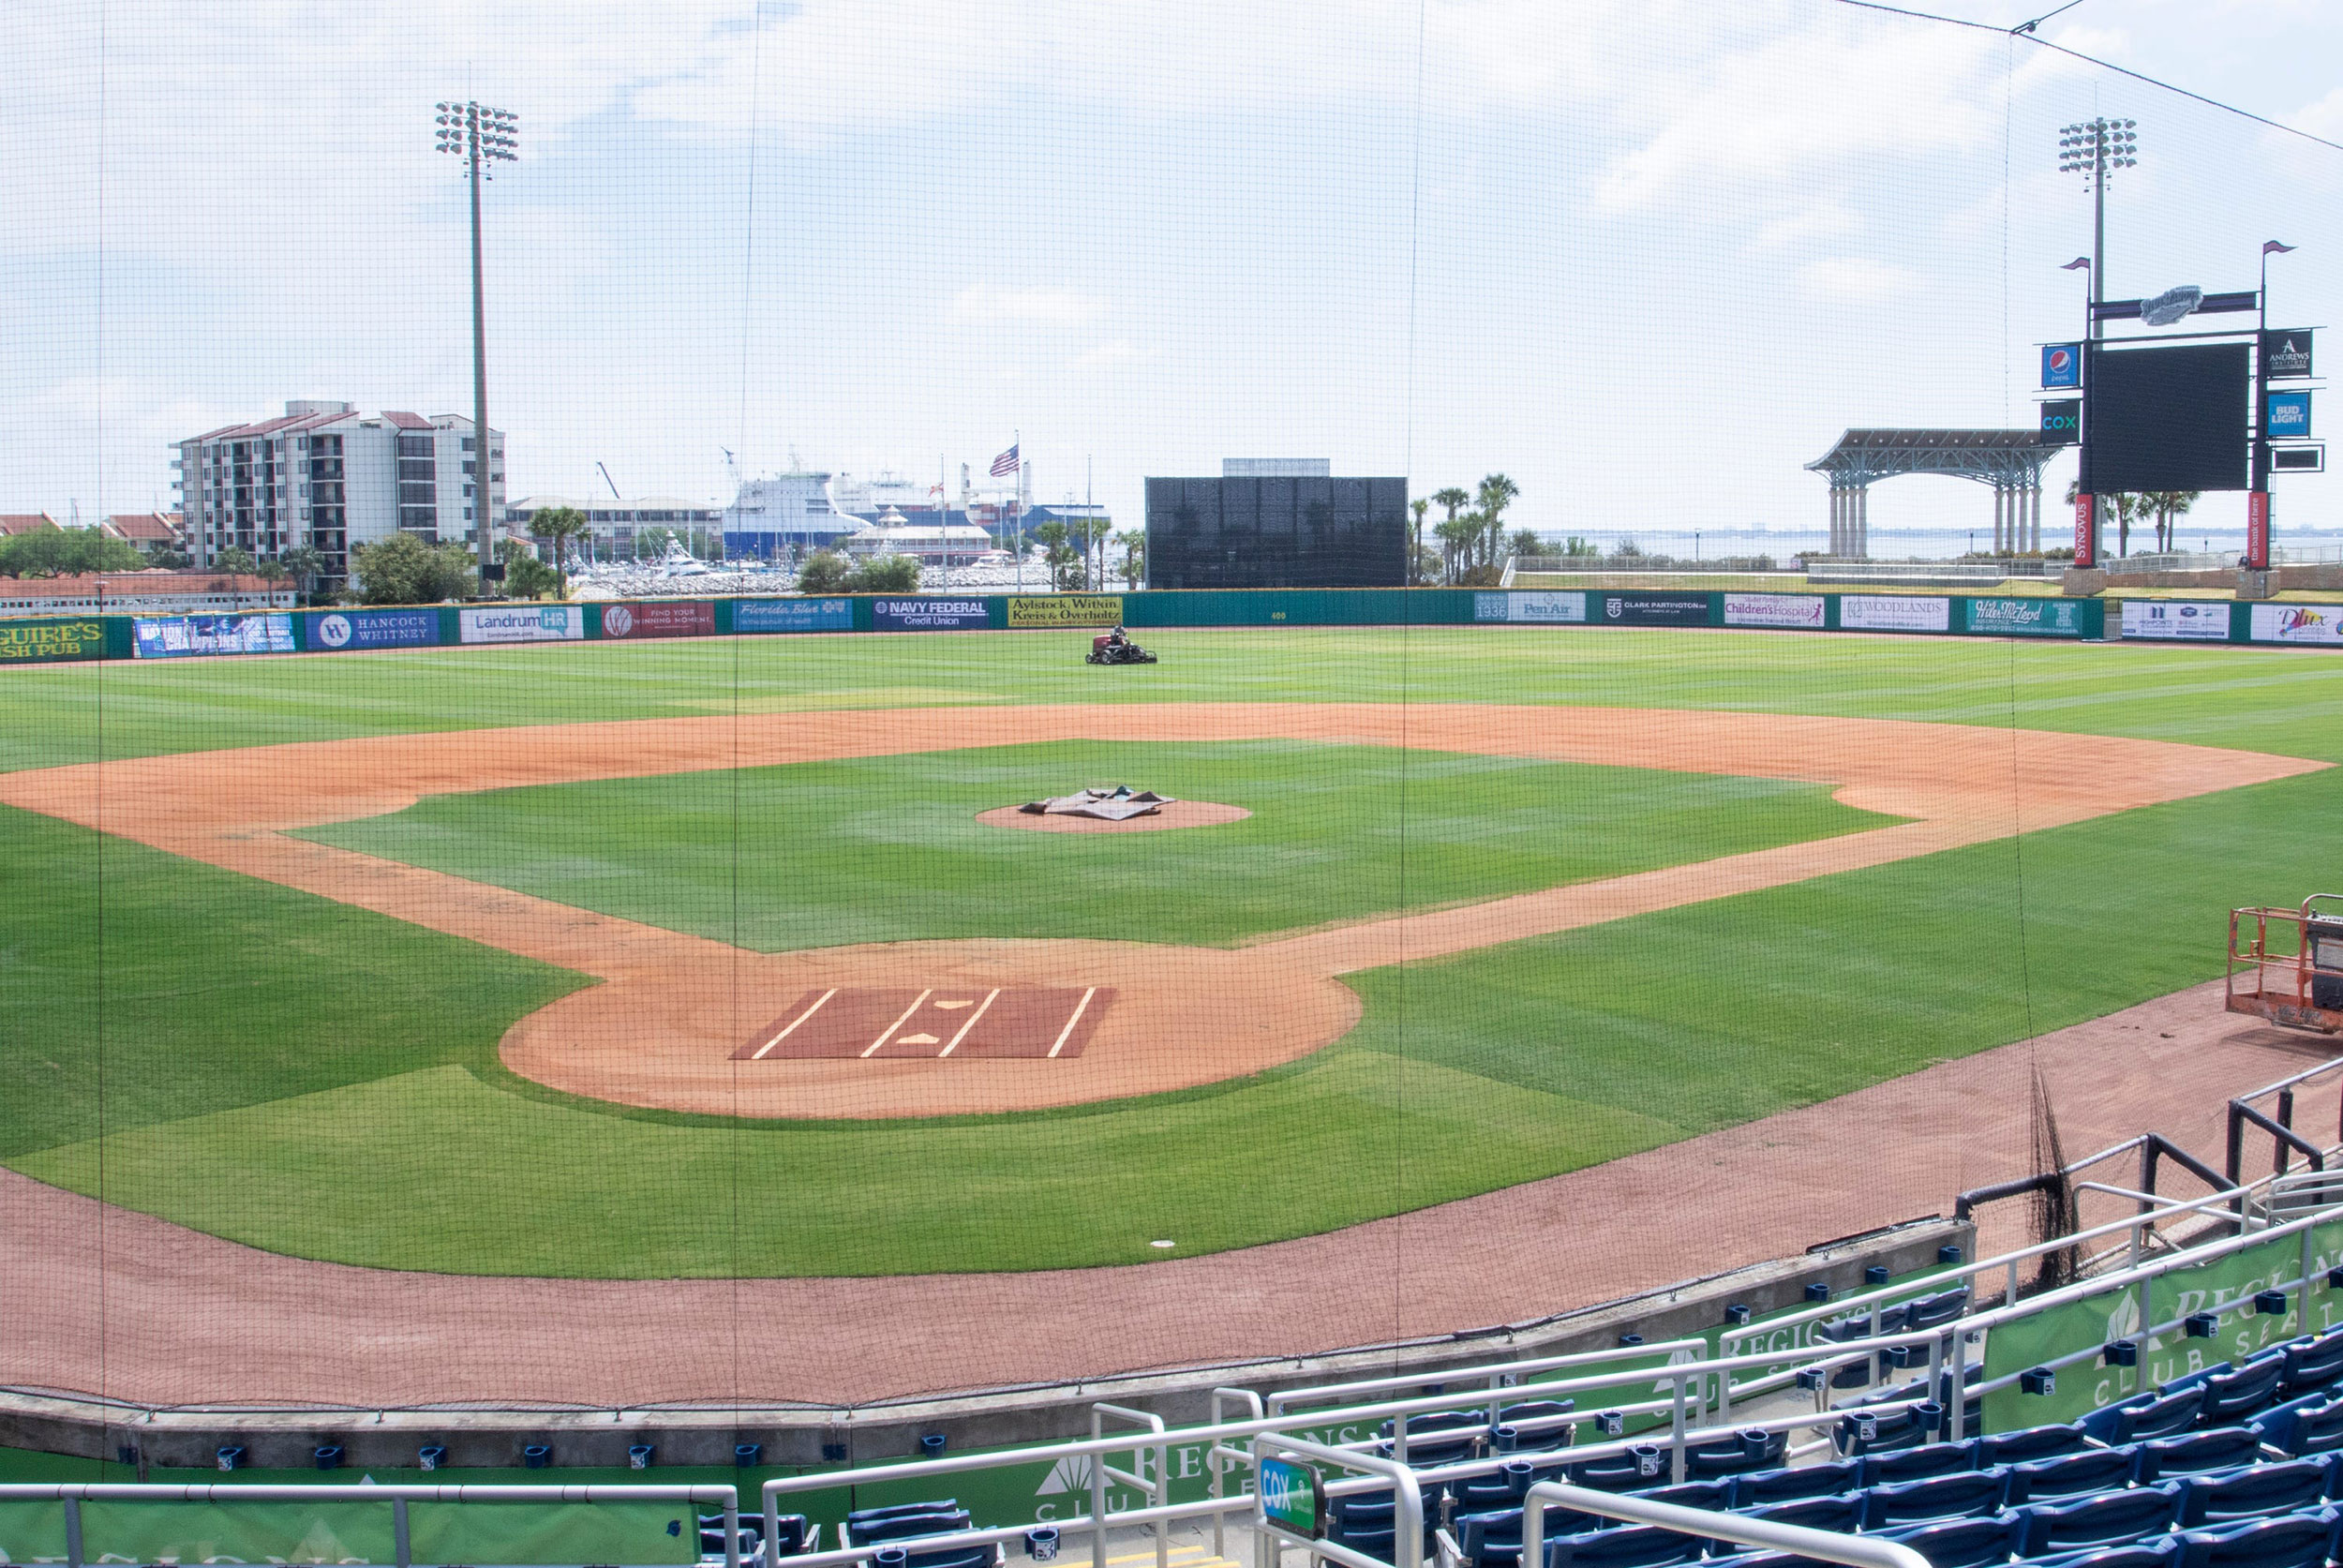 Airbnb baseball stadium opens for guests in Pensacola   CNN Travel